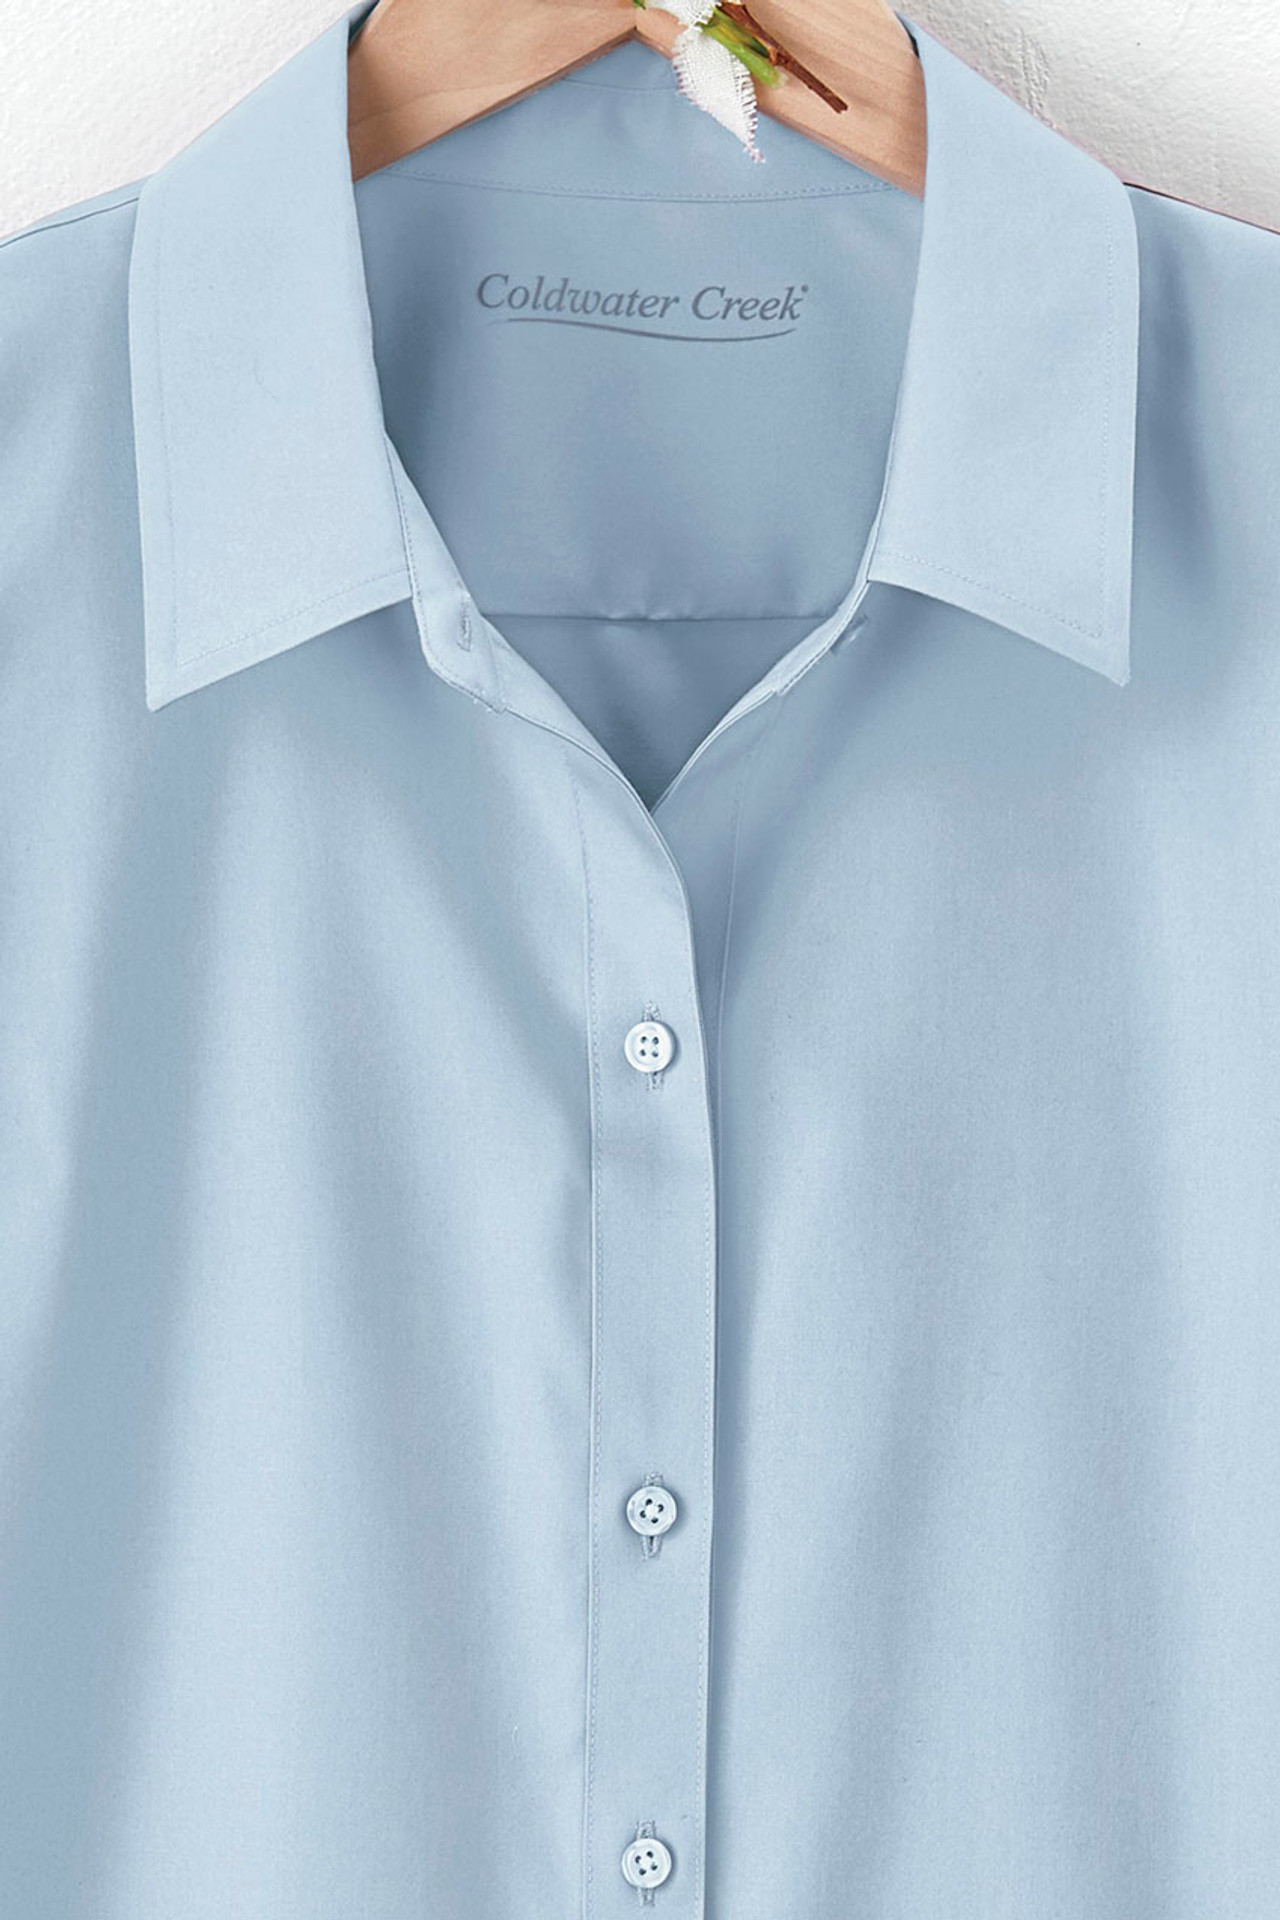 Short-Sleeve StainStop™ No-Iron Shirt